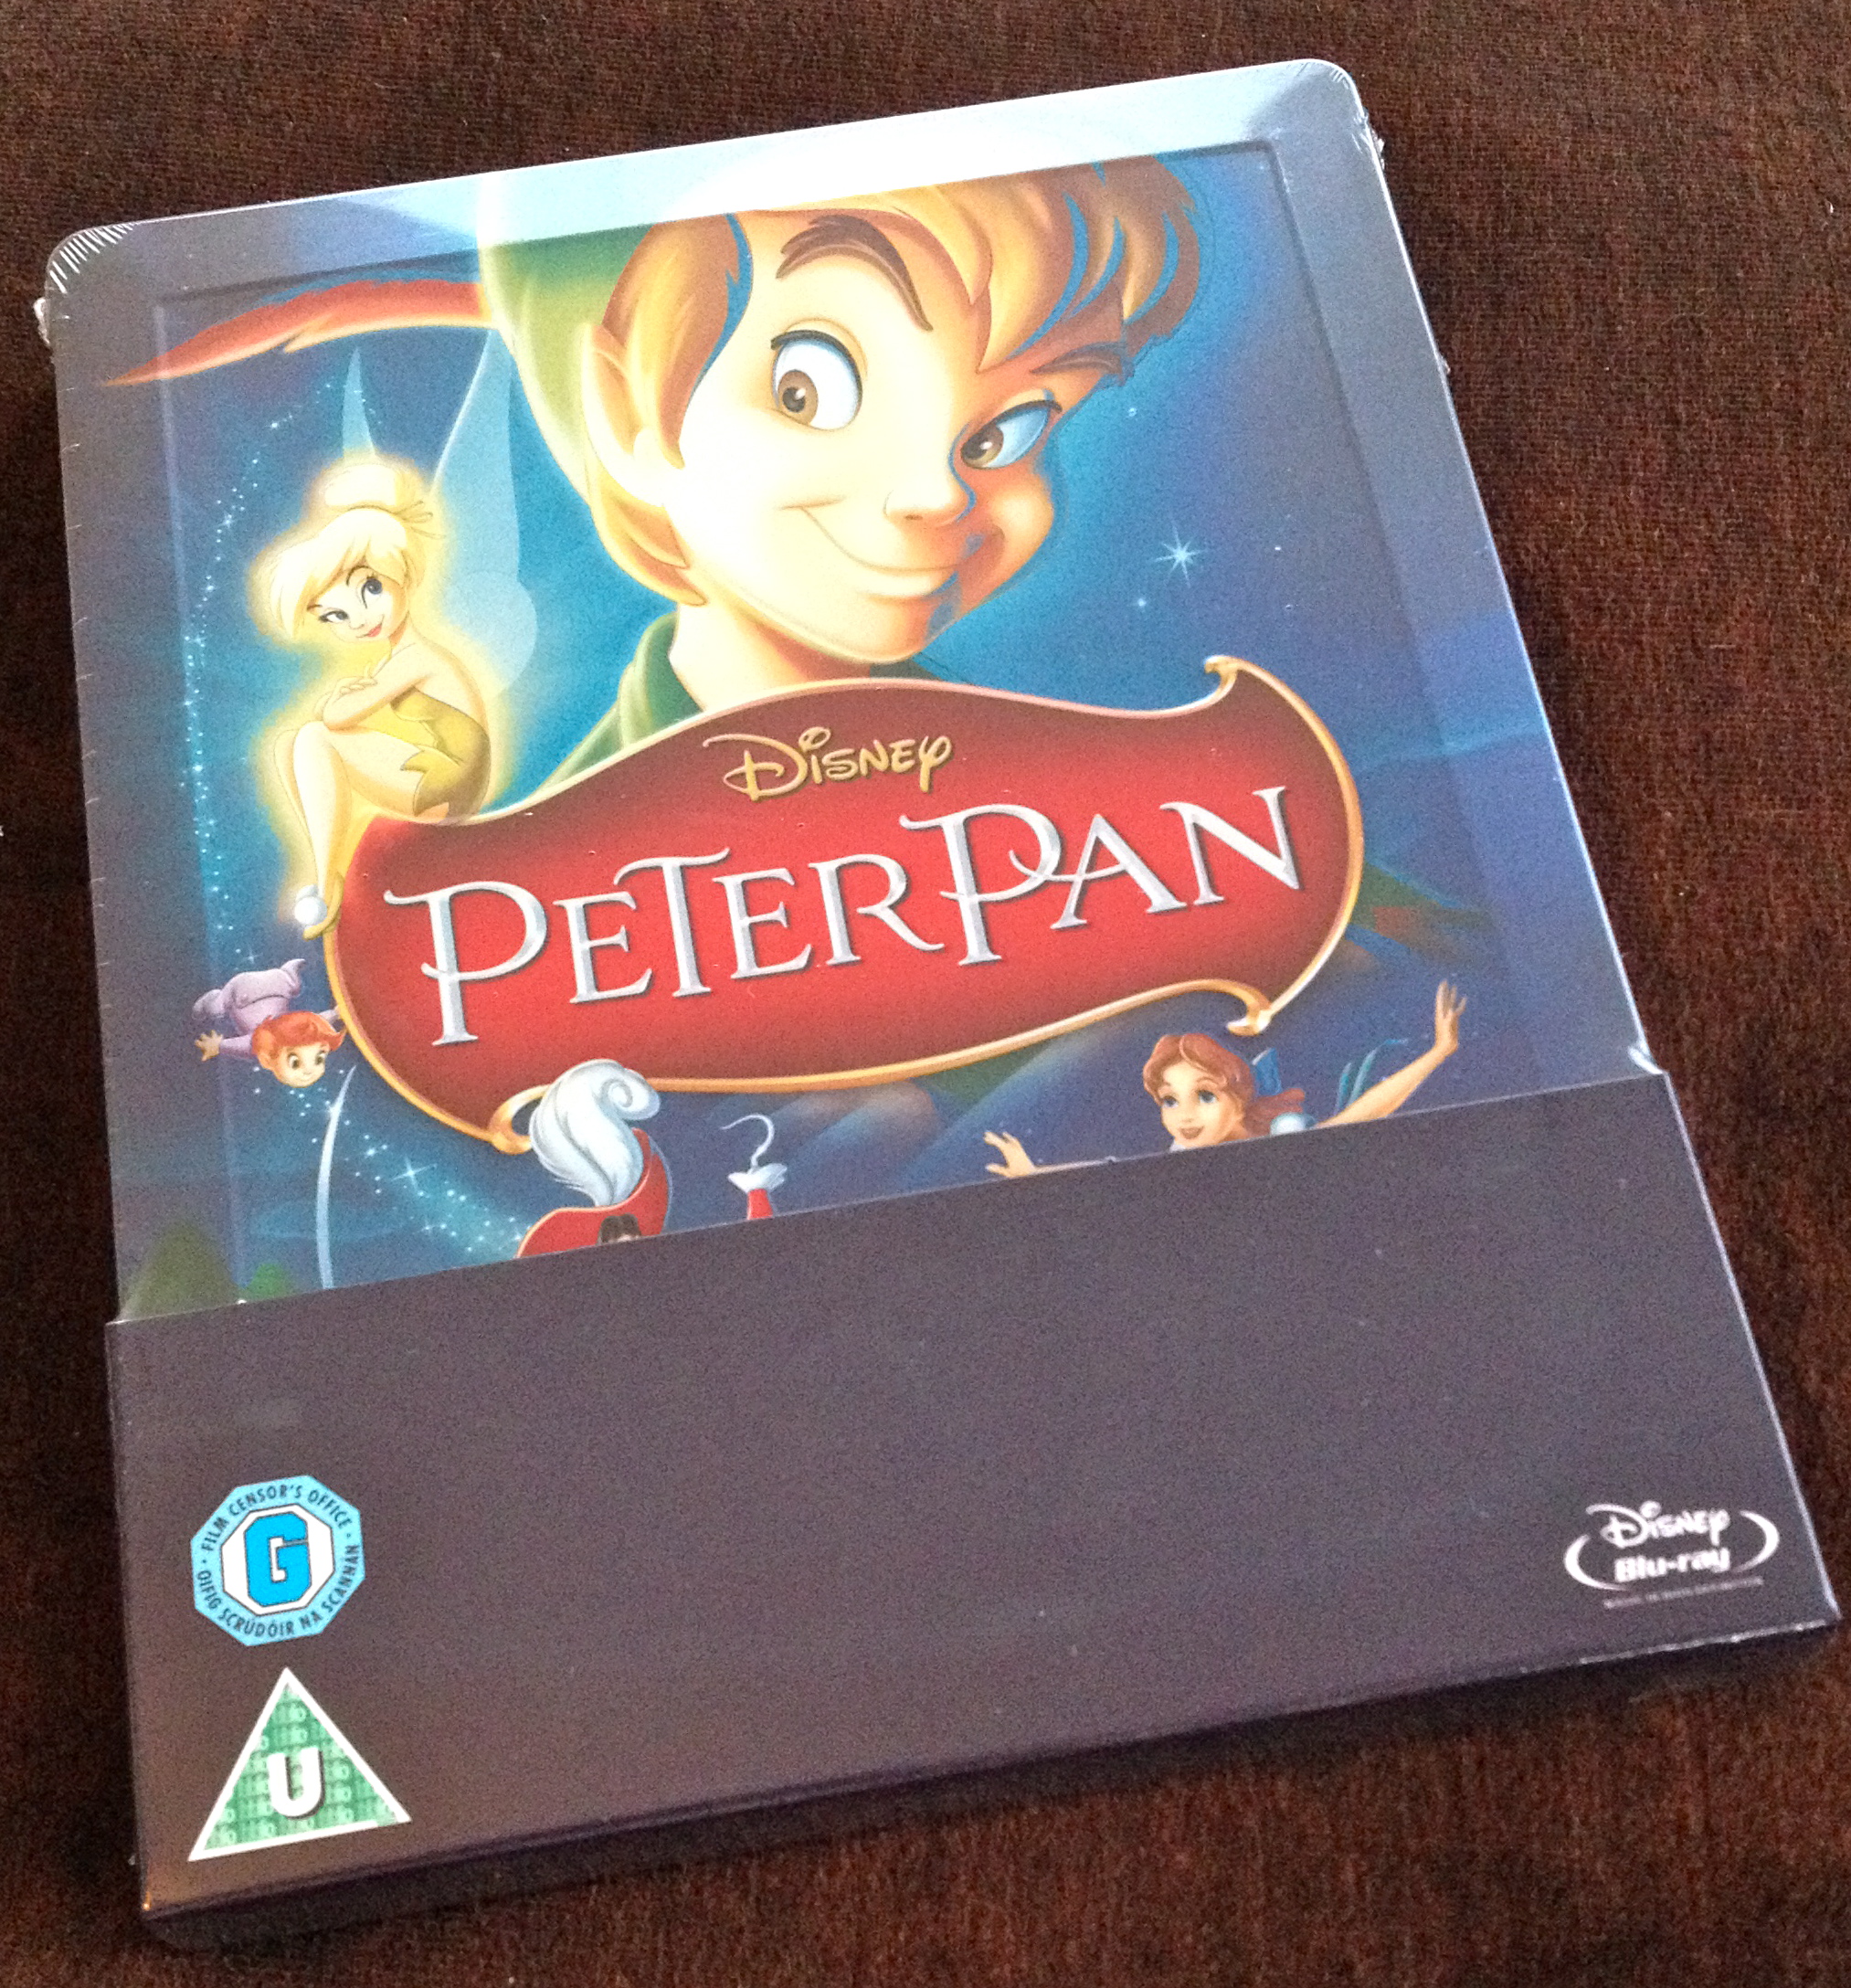 PETER PAN (Zavvi...Released February 10th, 2014)